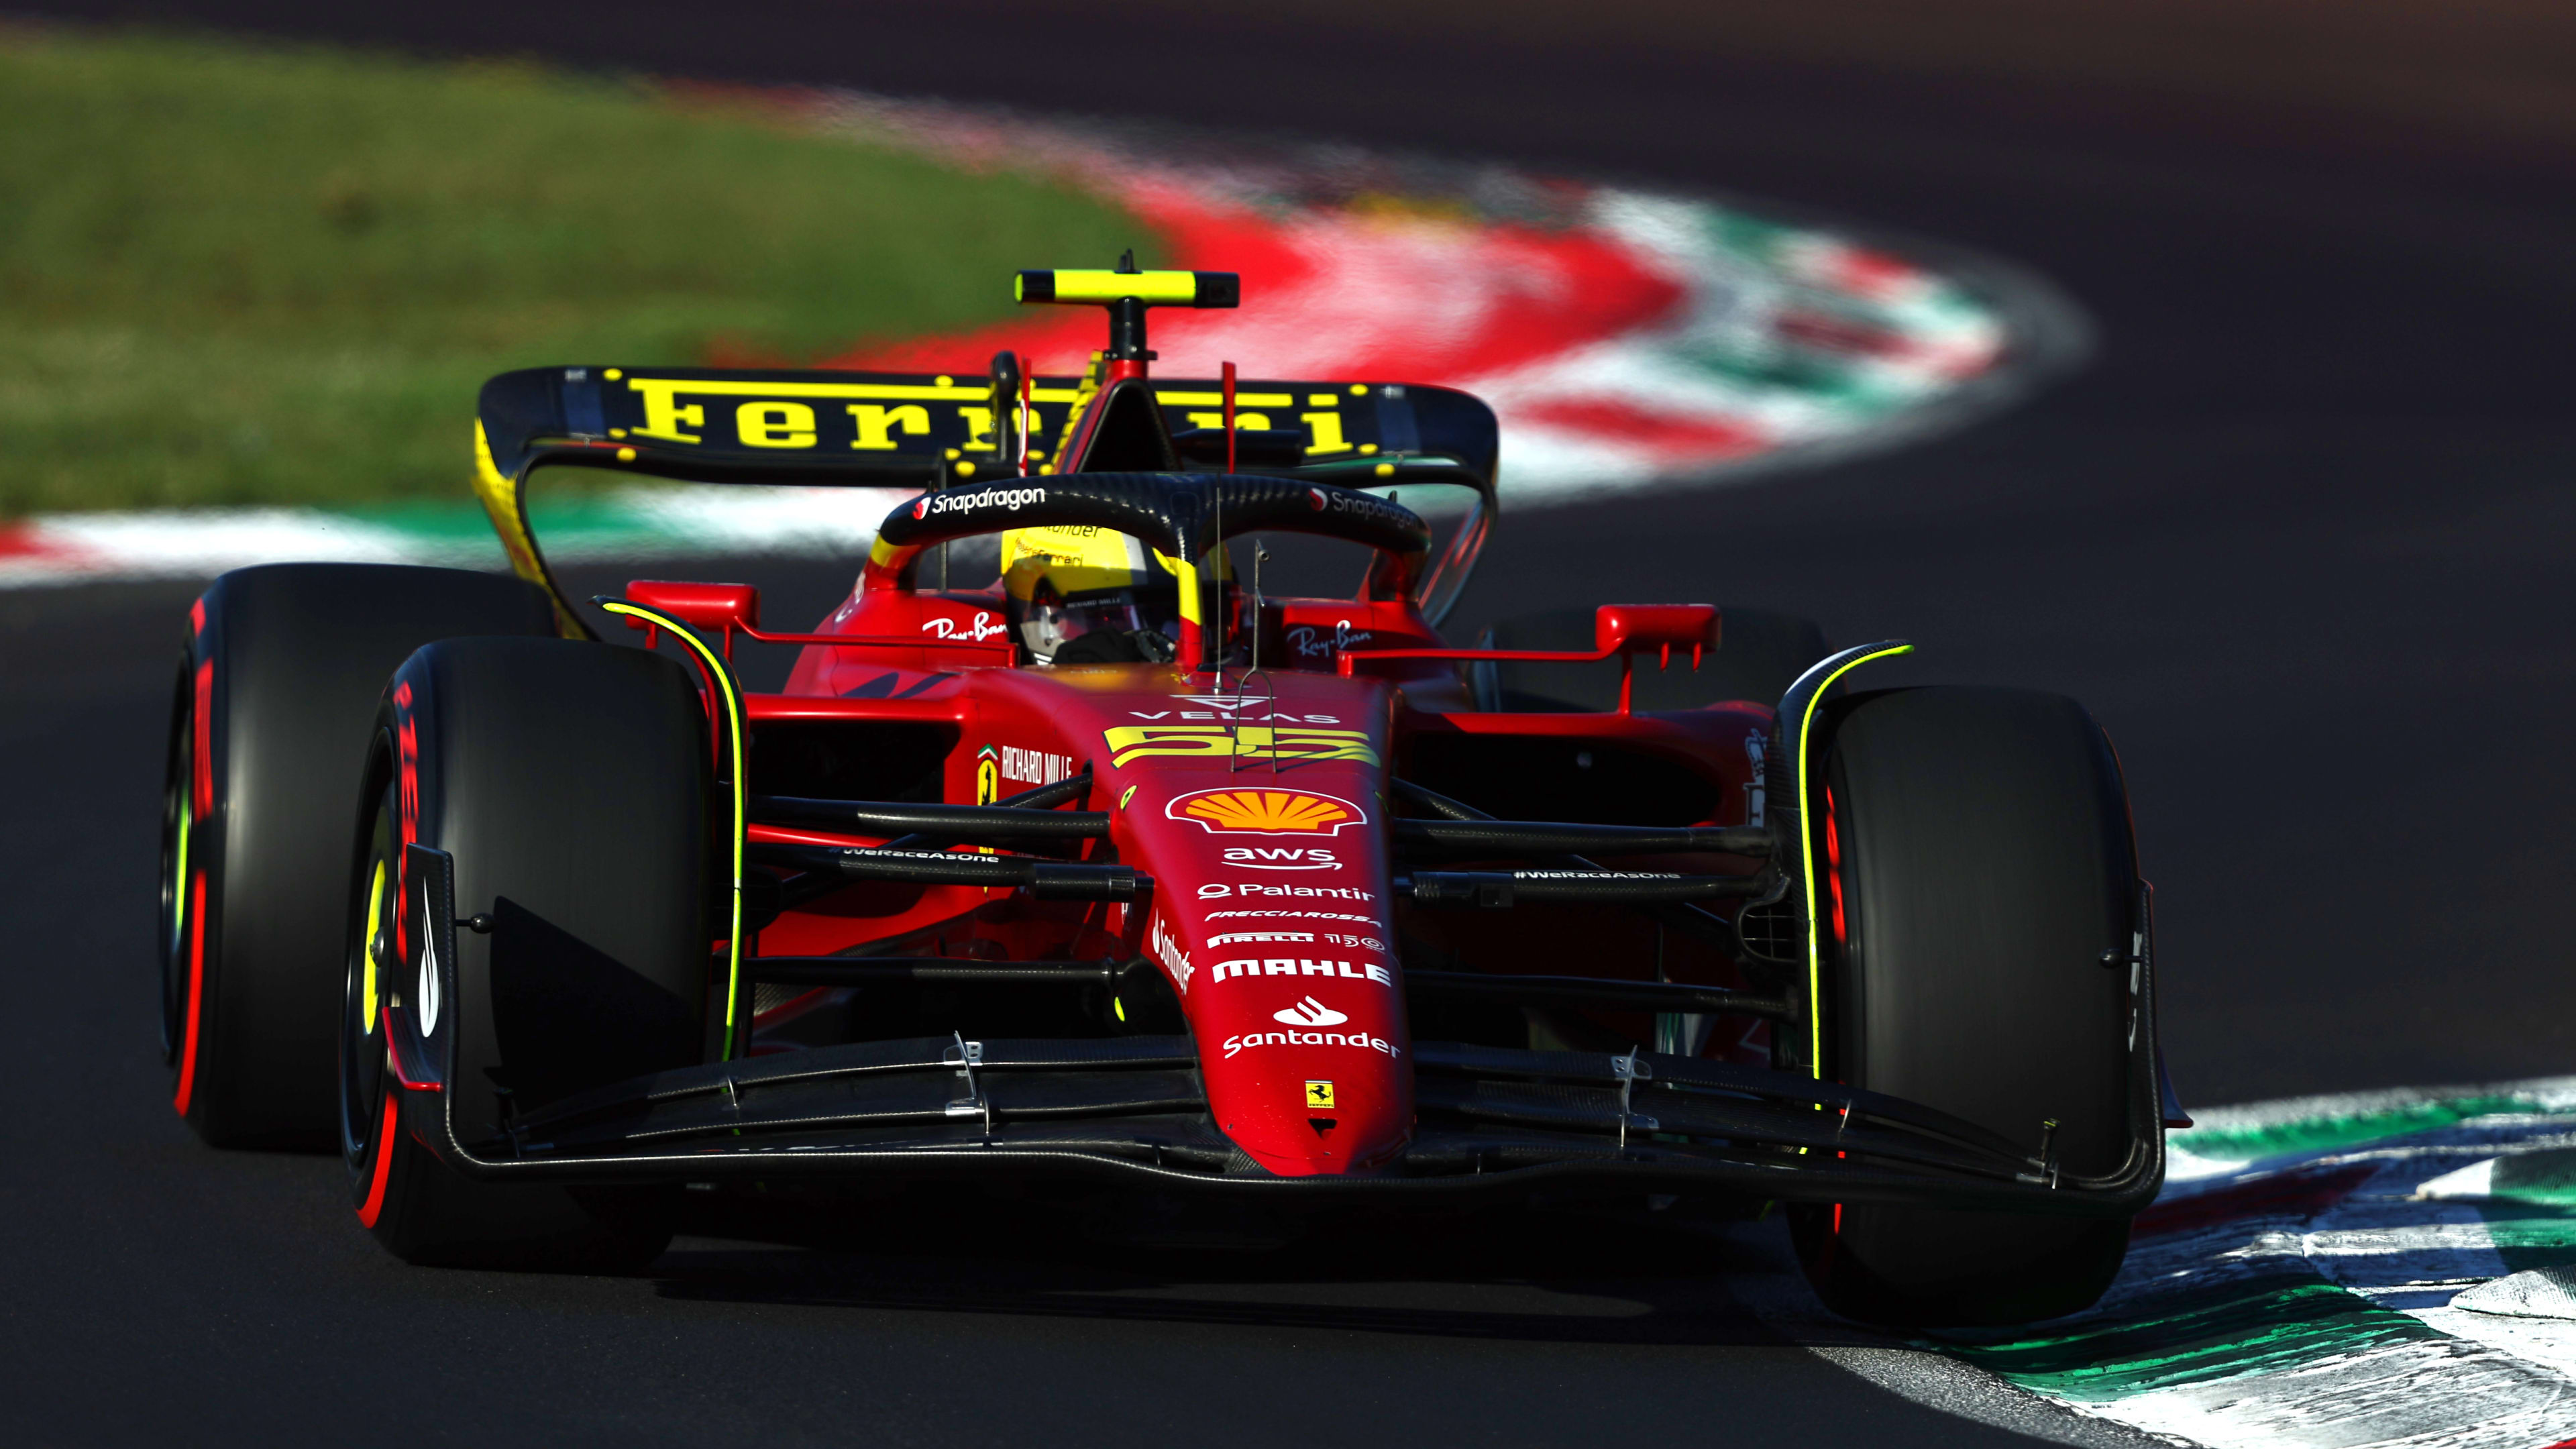 2022 Italian Grand Prix FP2 report and highlights Sainz leads Verstappen and Leclerc in second